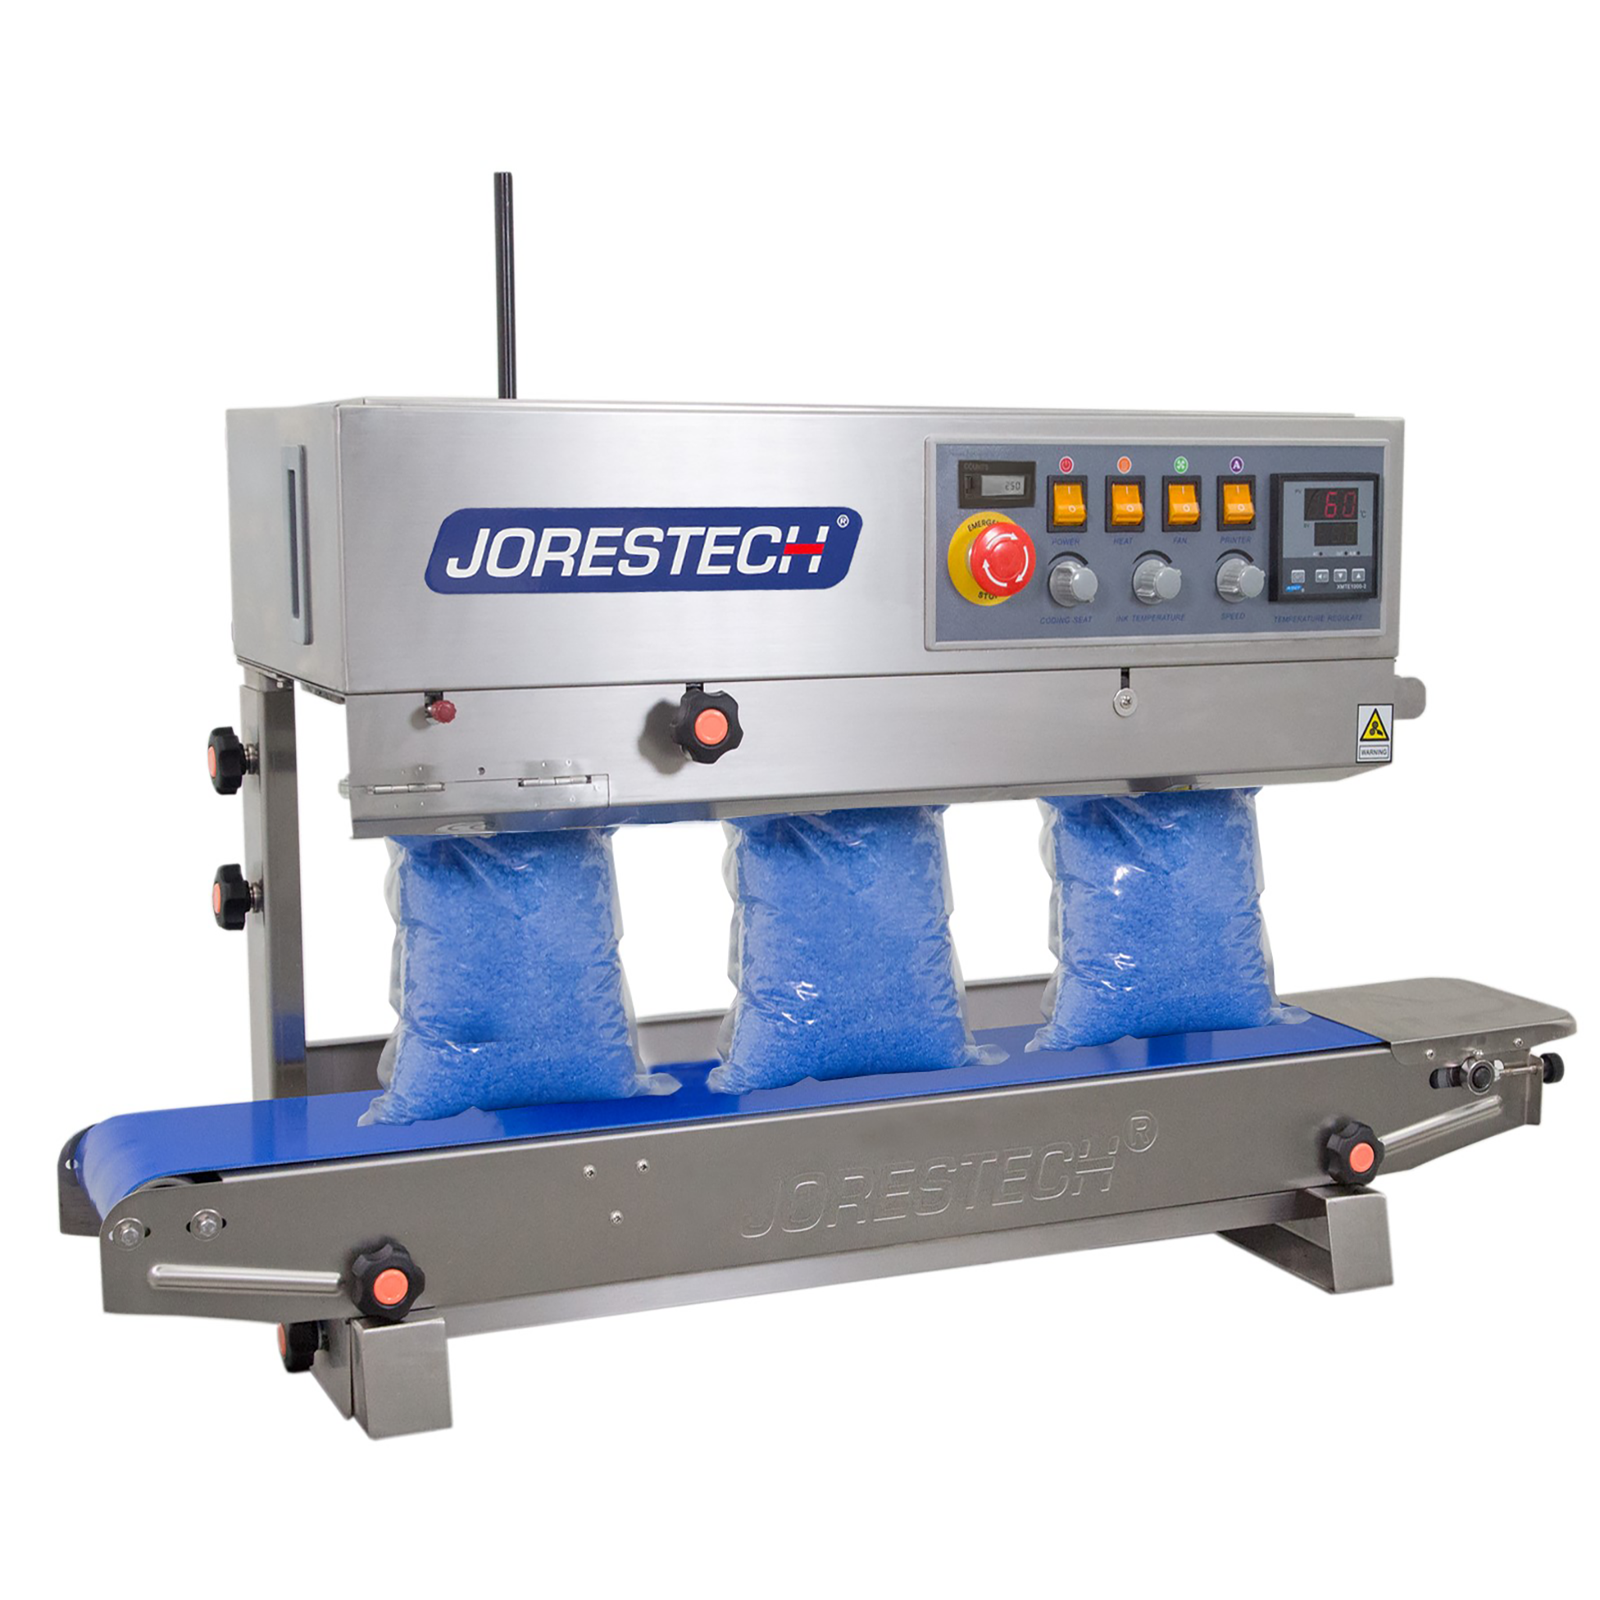 stainless steel JORESTECH continuous band sealer sealing several plastic bags filled with blue wax beads